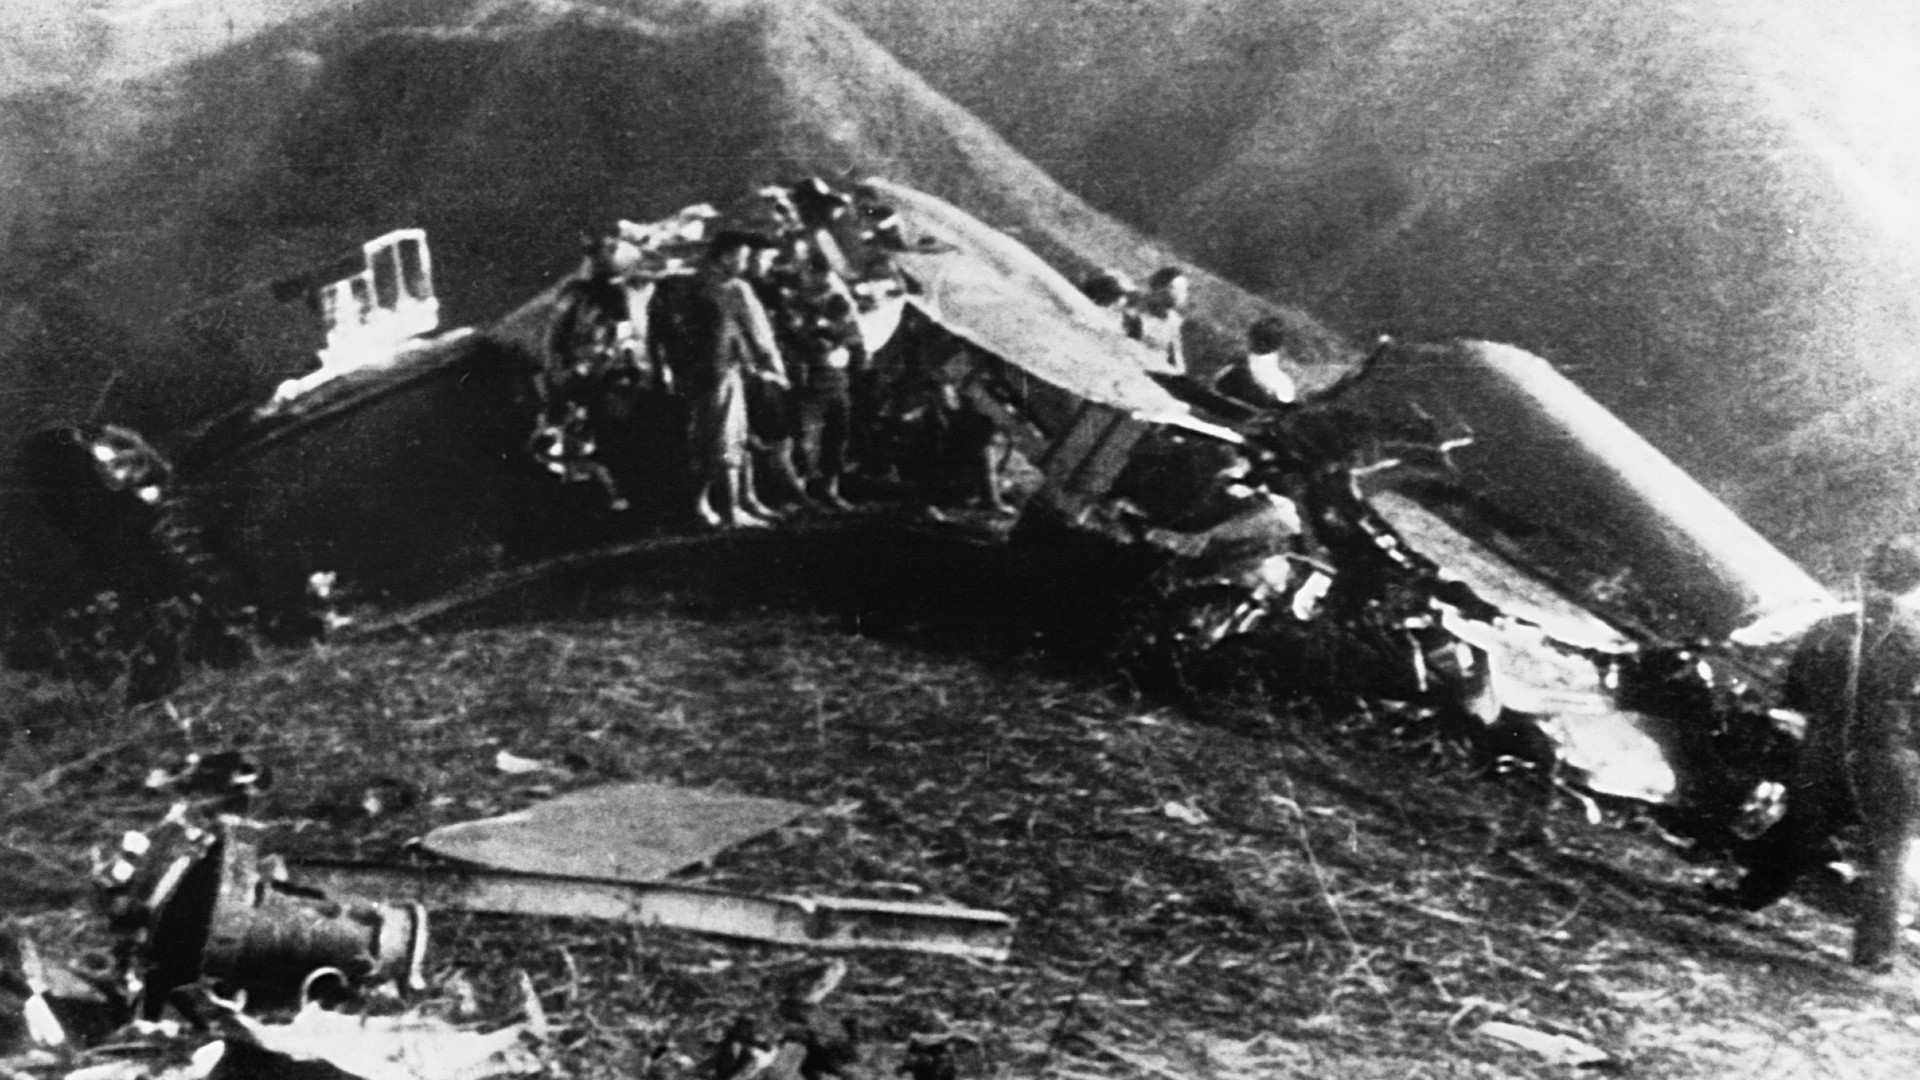 Wreckage of a US Plane in the aftermath of the raid